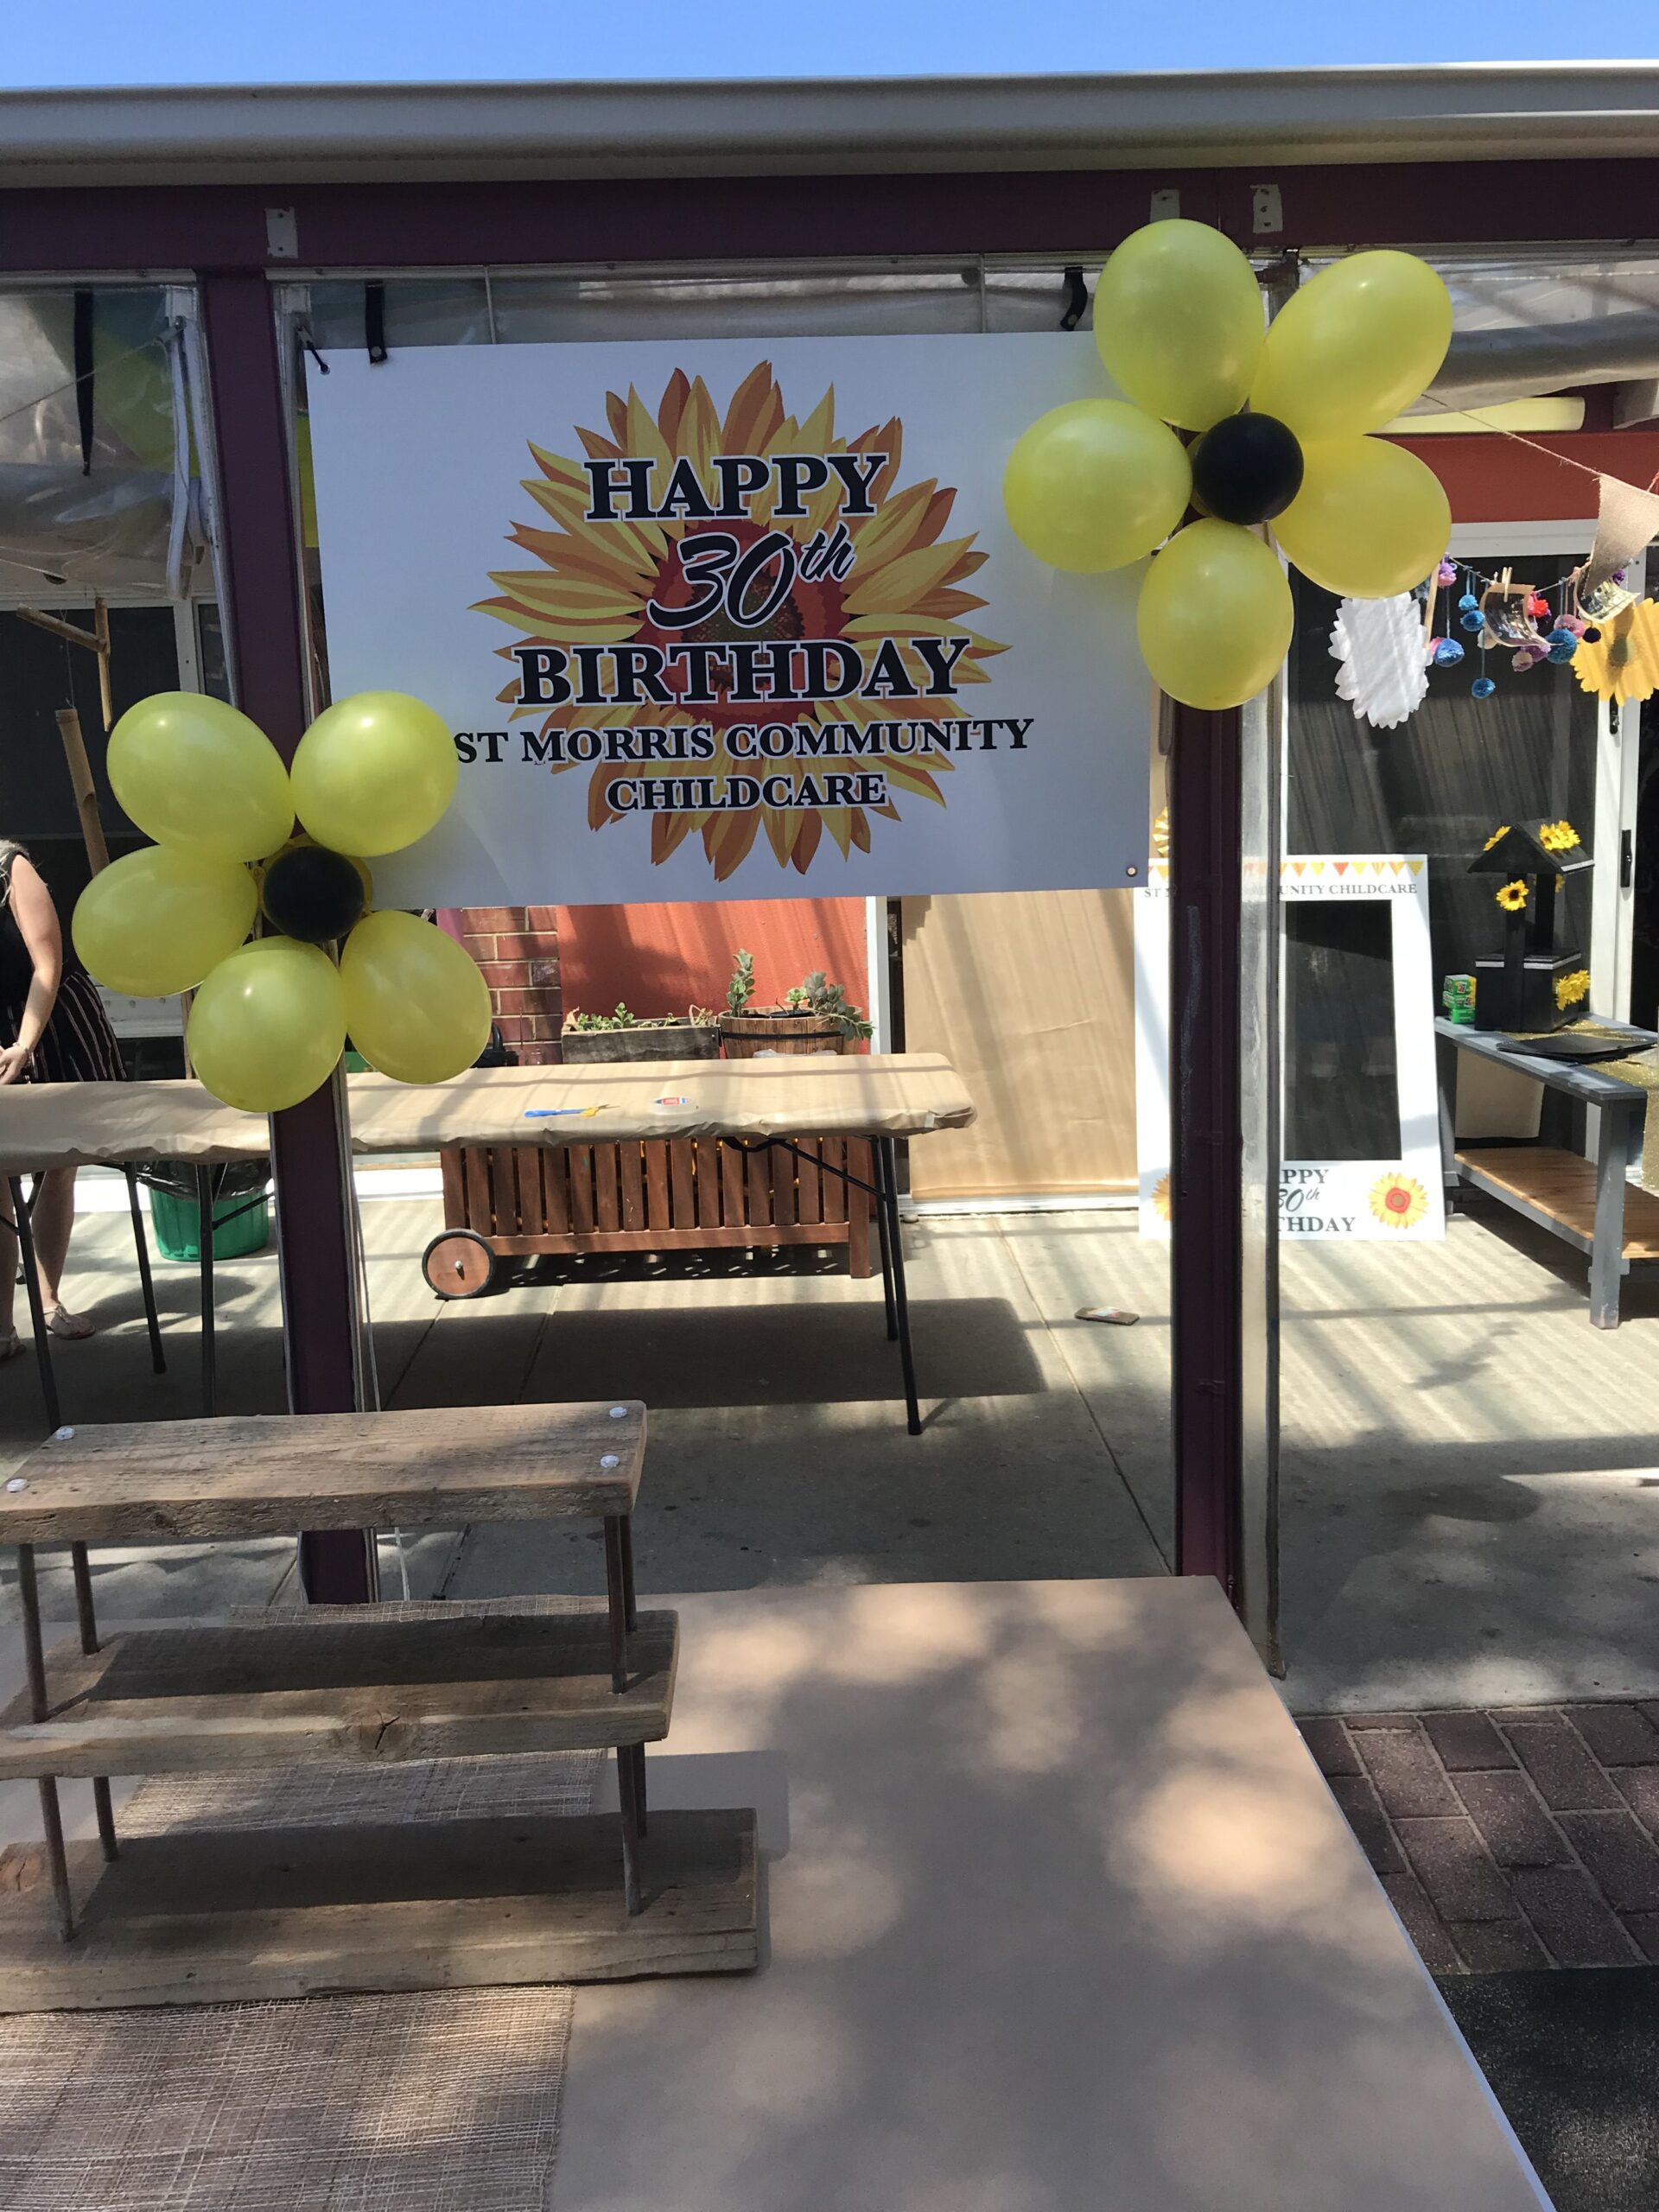 St Morris Community Childcare Centre decorated for 30th birthday